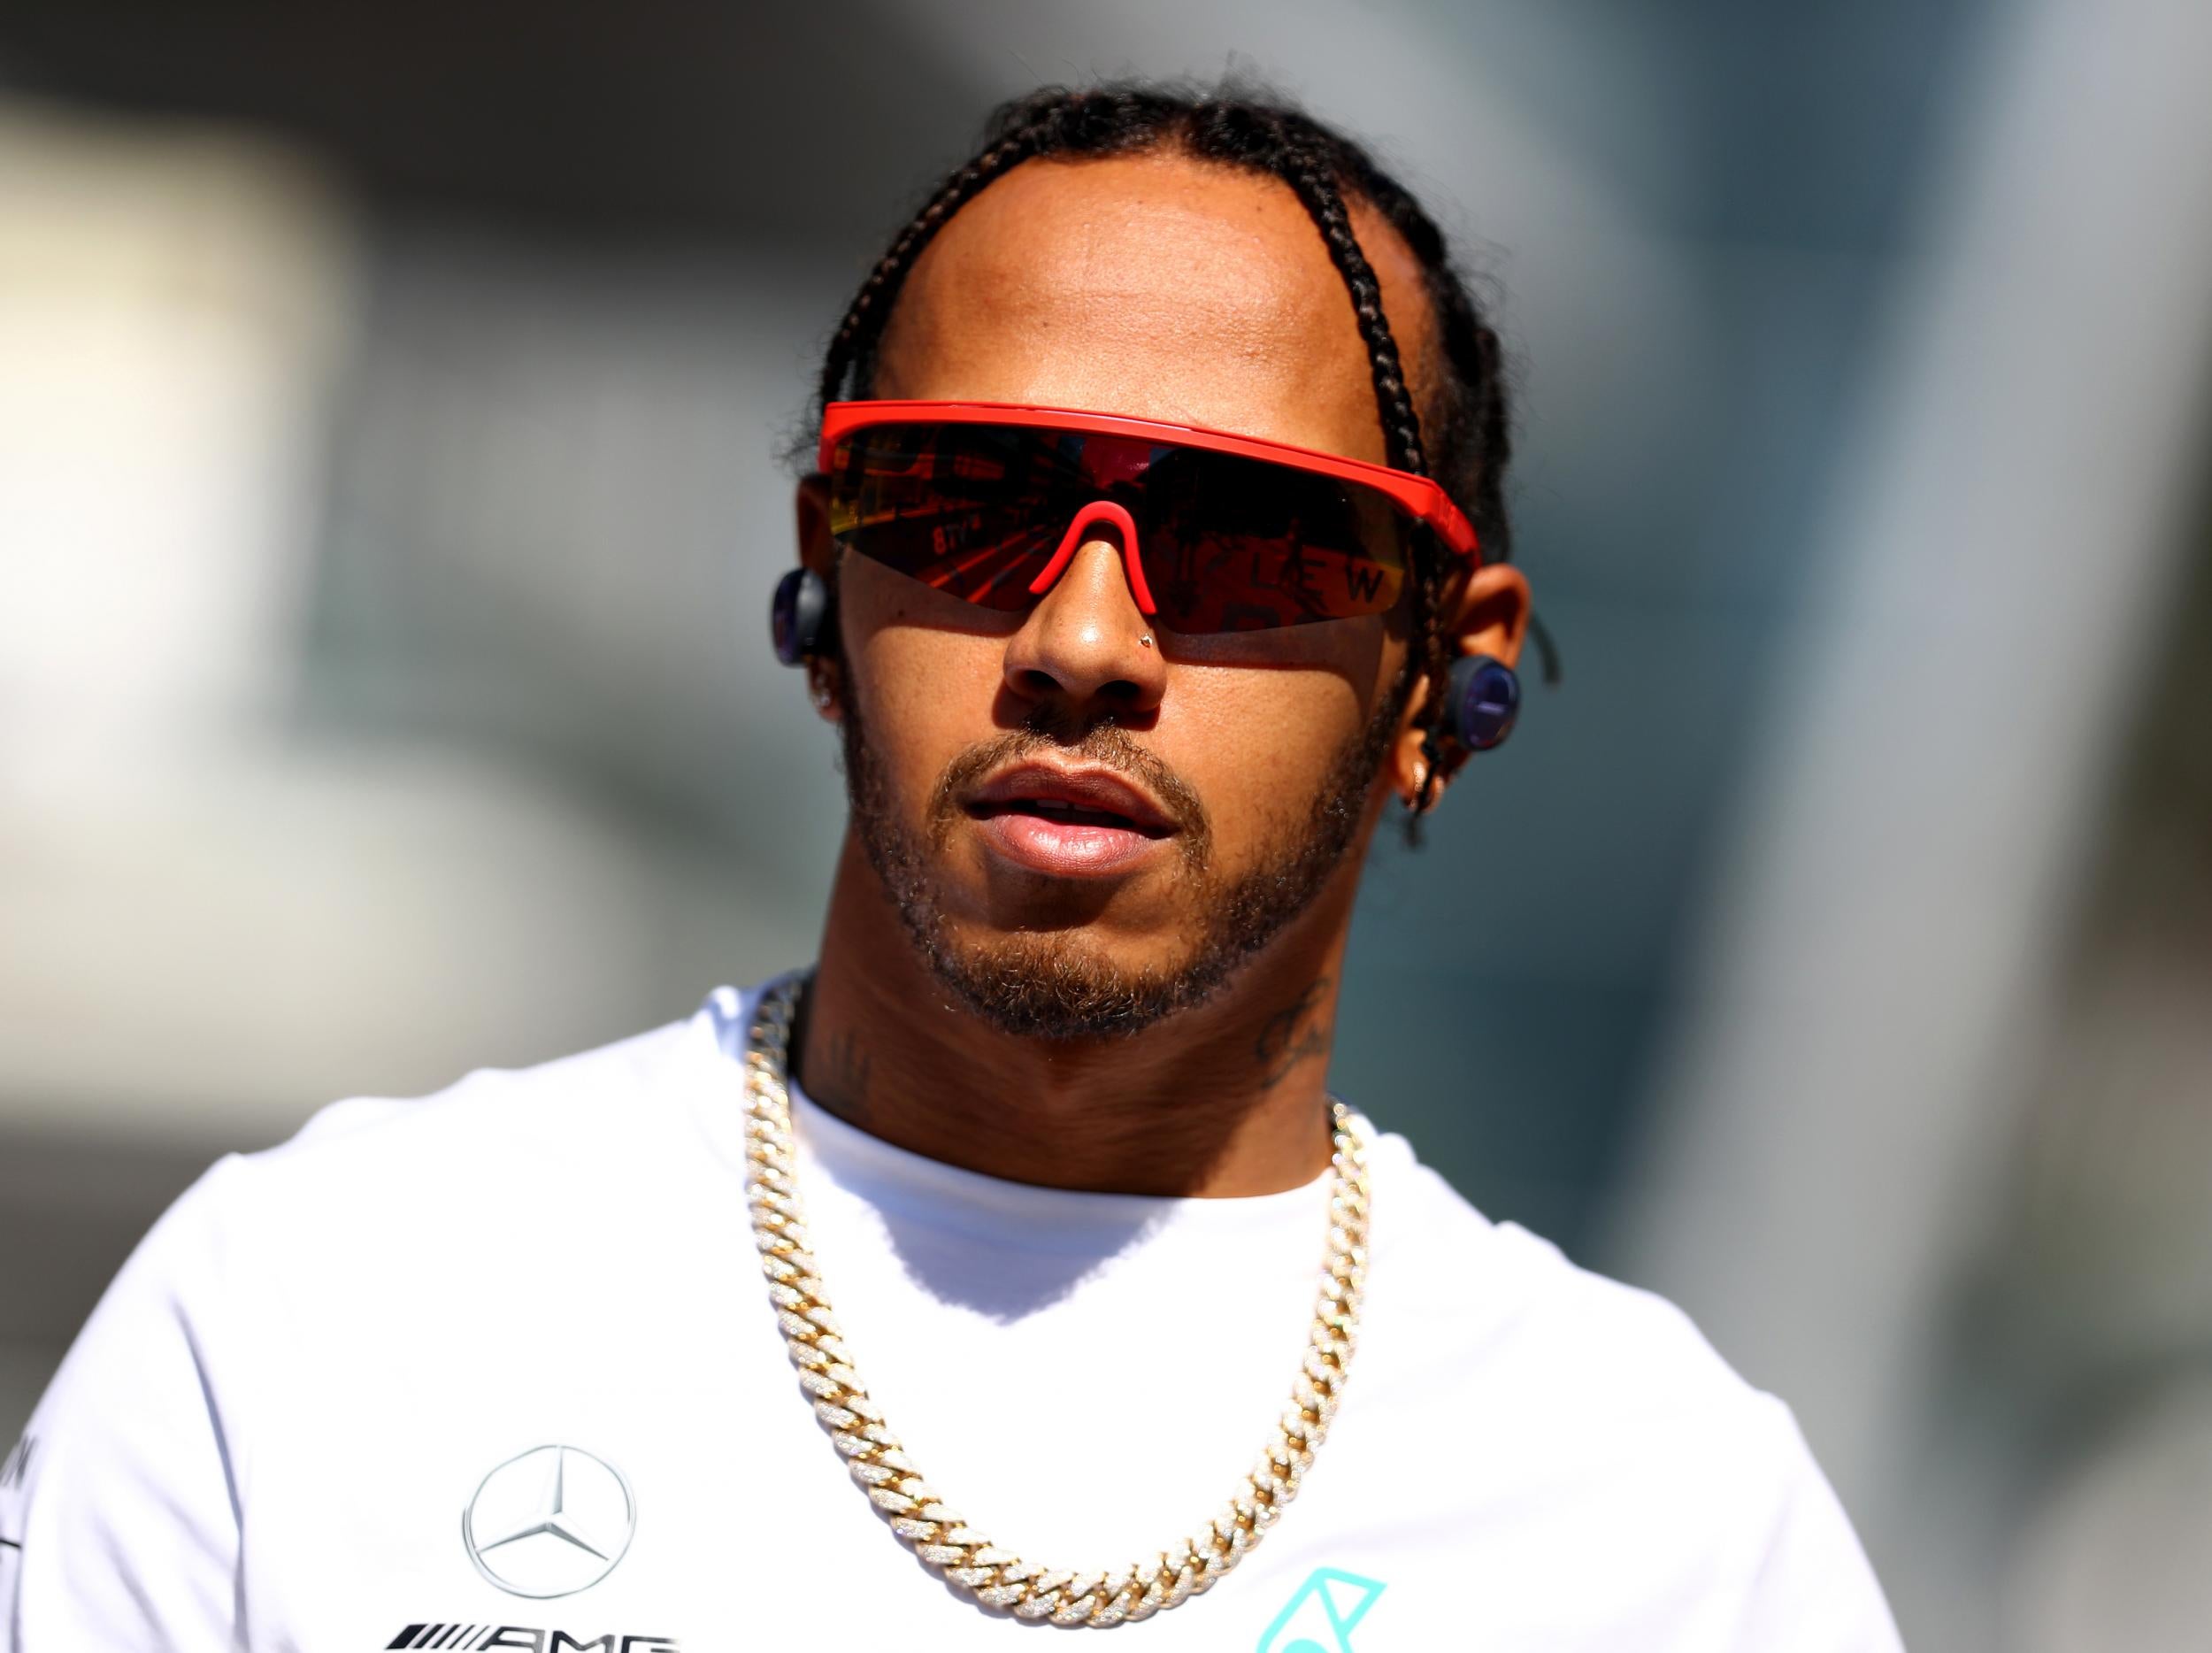 Hamilton has been ambiguous over his future